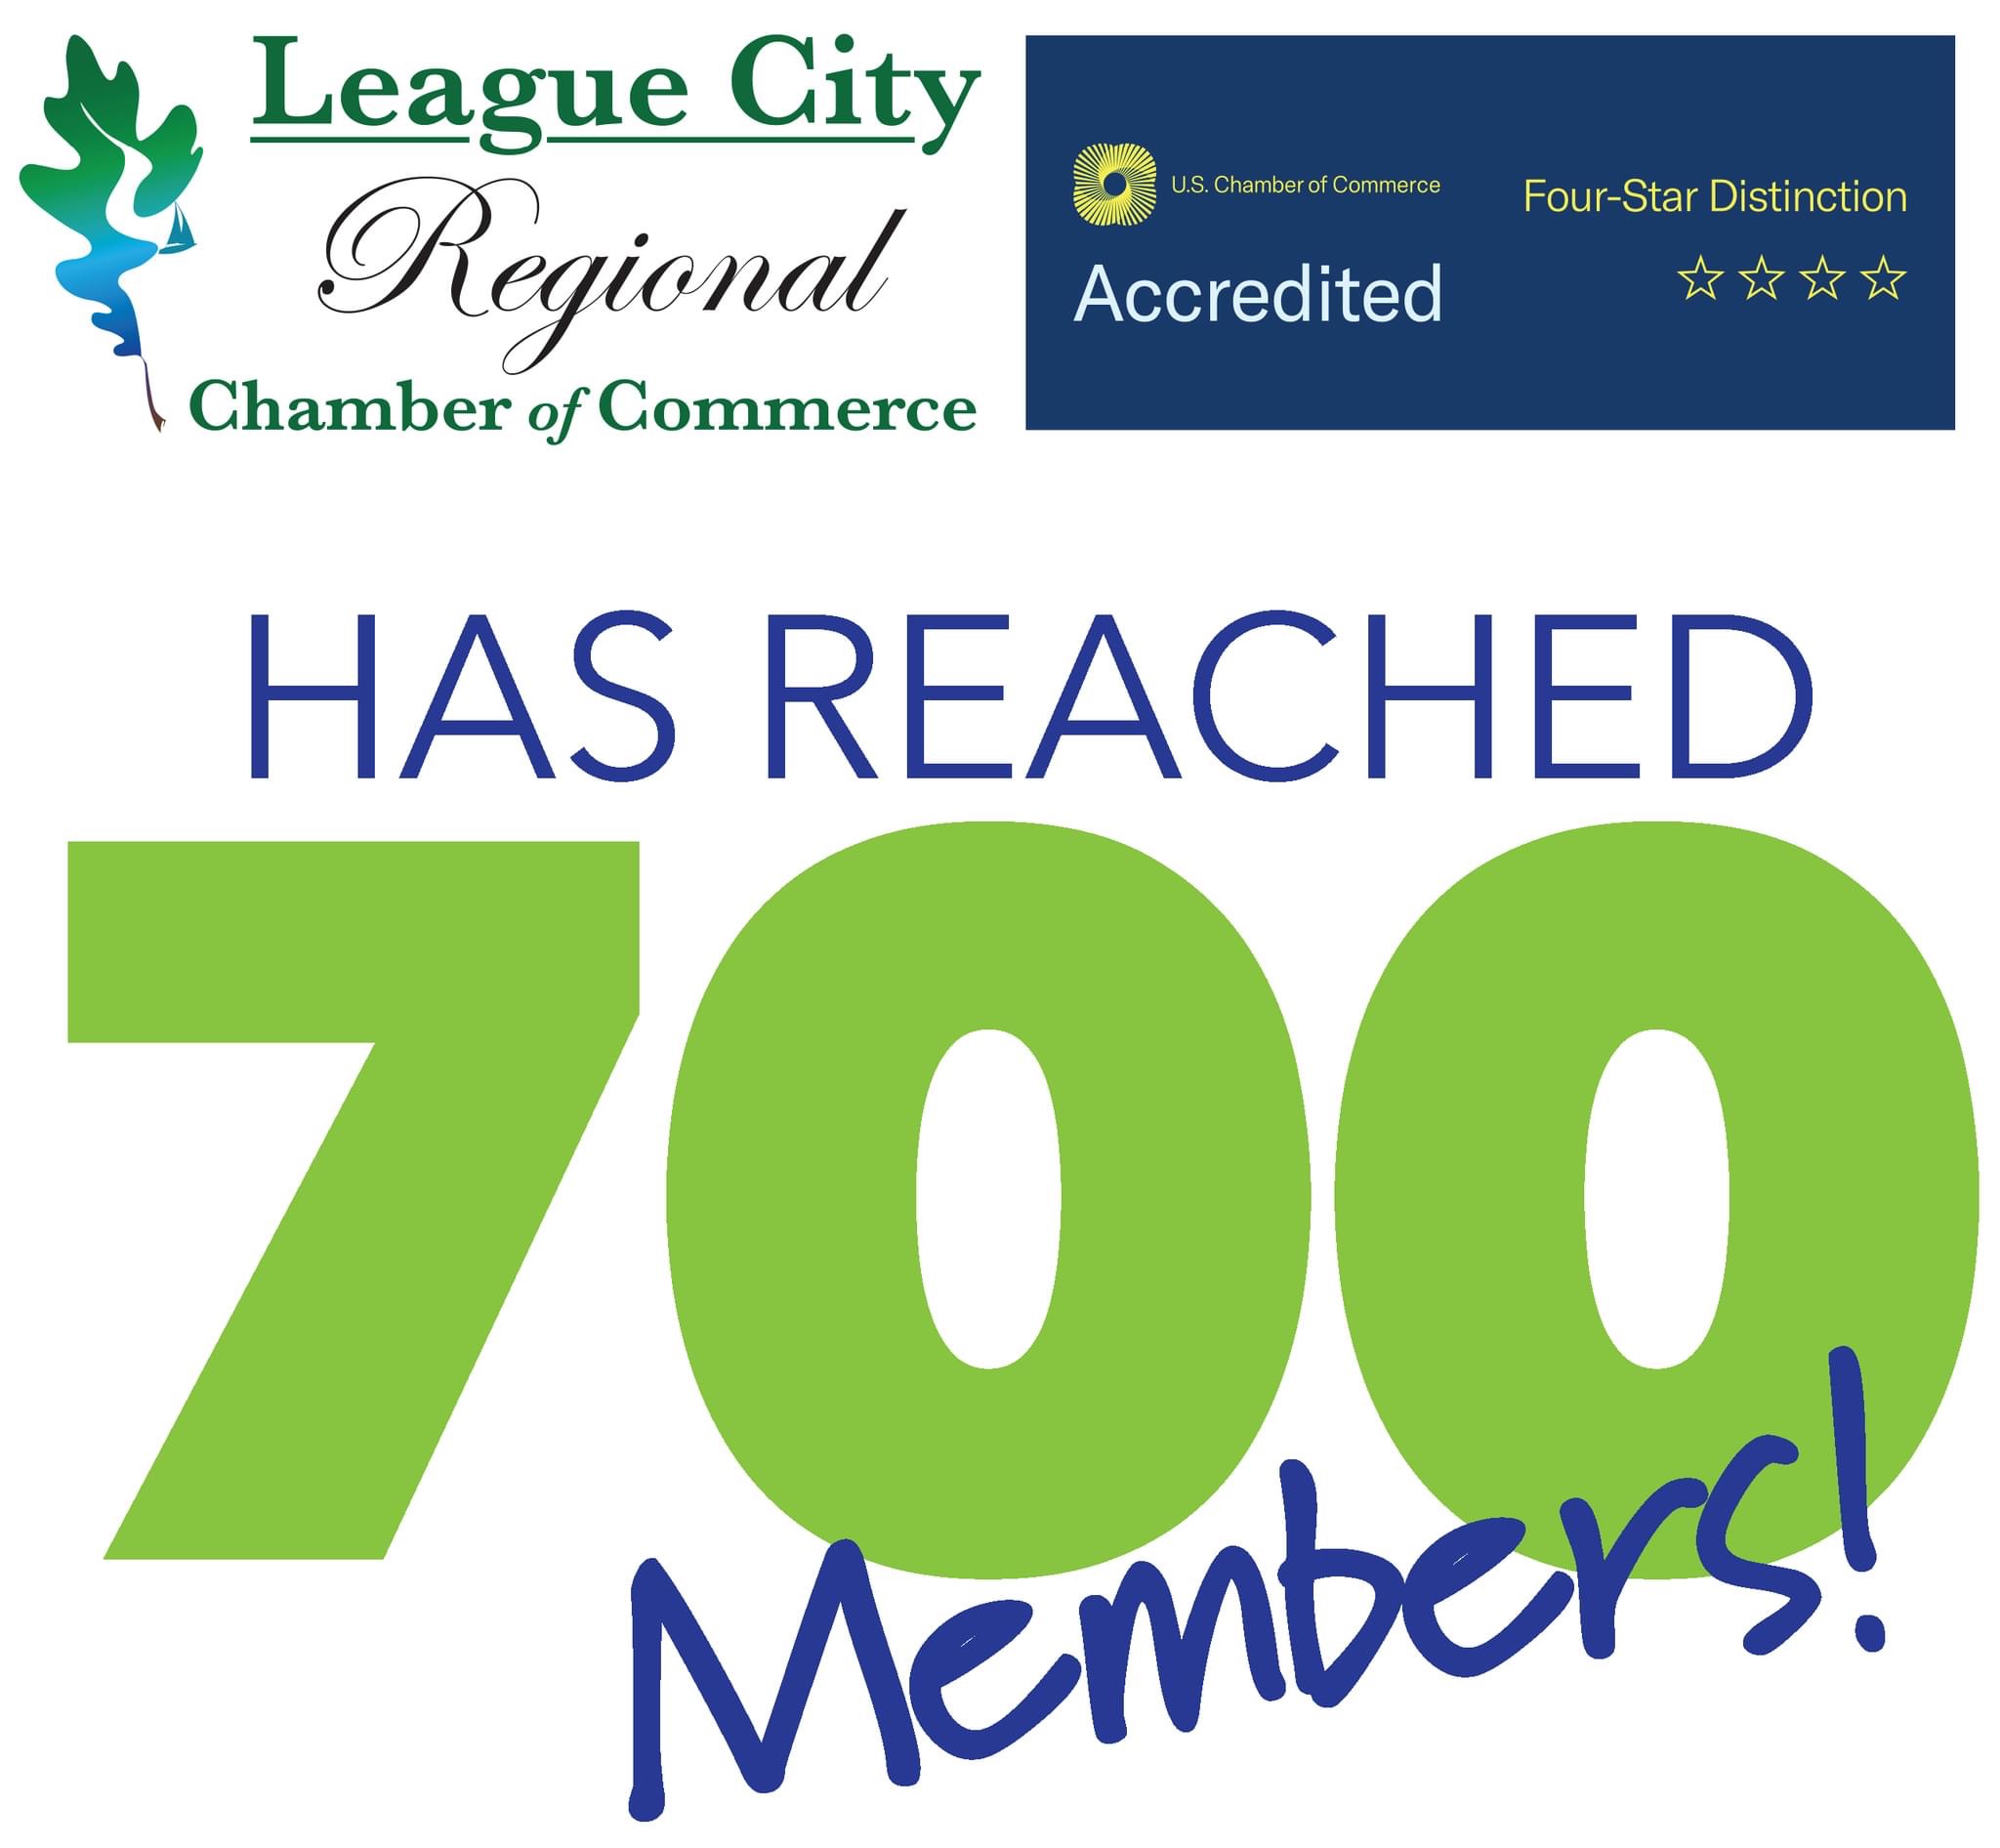 Image for League City Regional Chamber reaches 700 members!